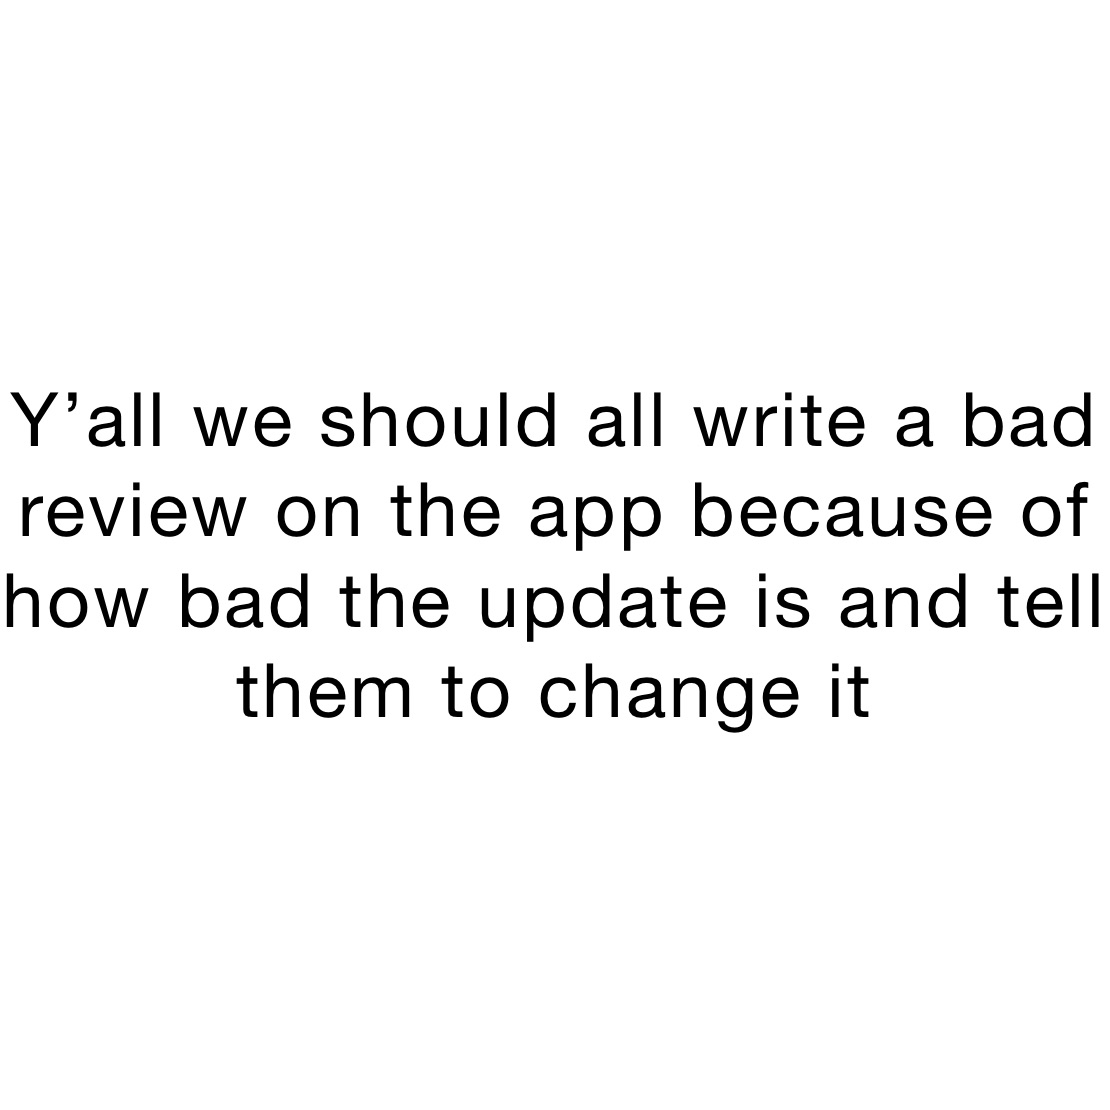 Y’all we should all write a bad review on the app because of how bad the update is and tell them to change it 